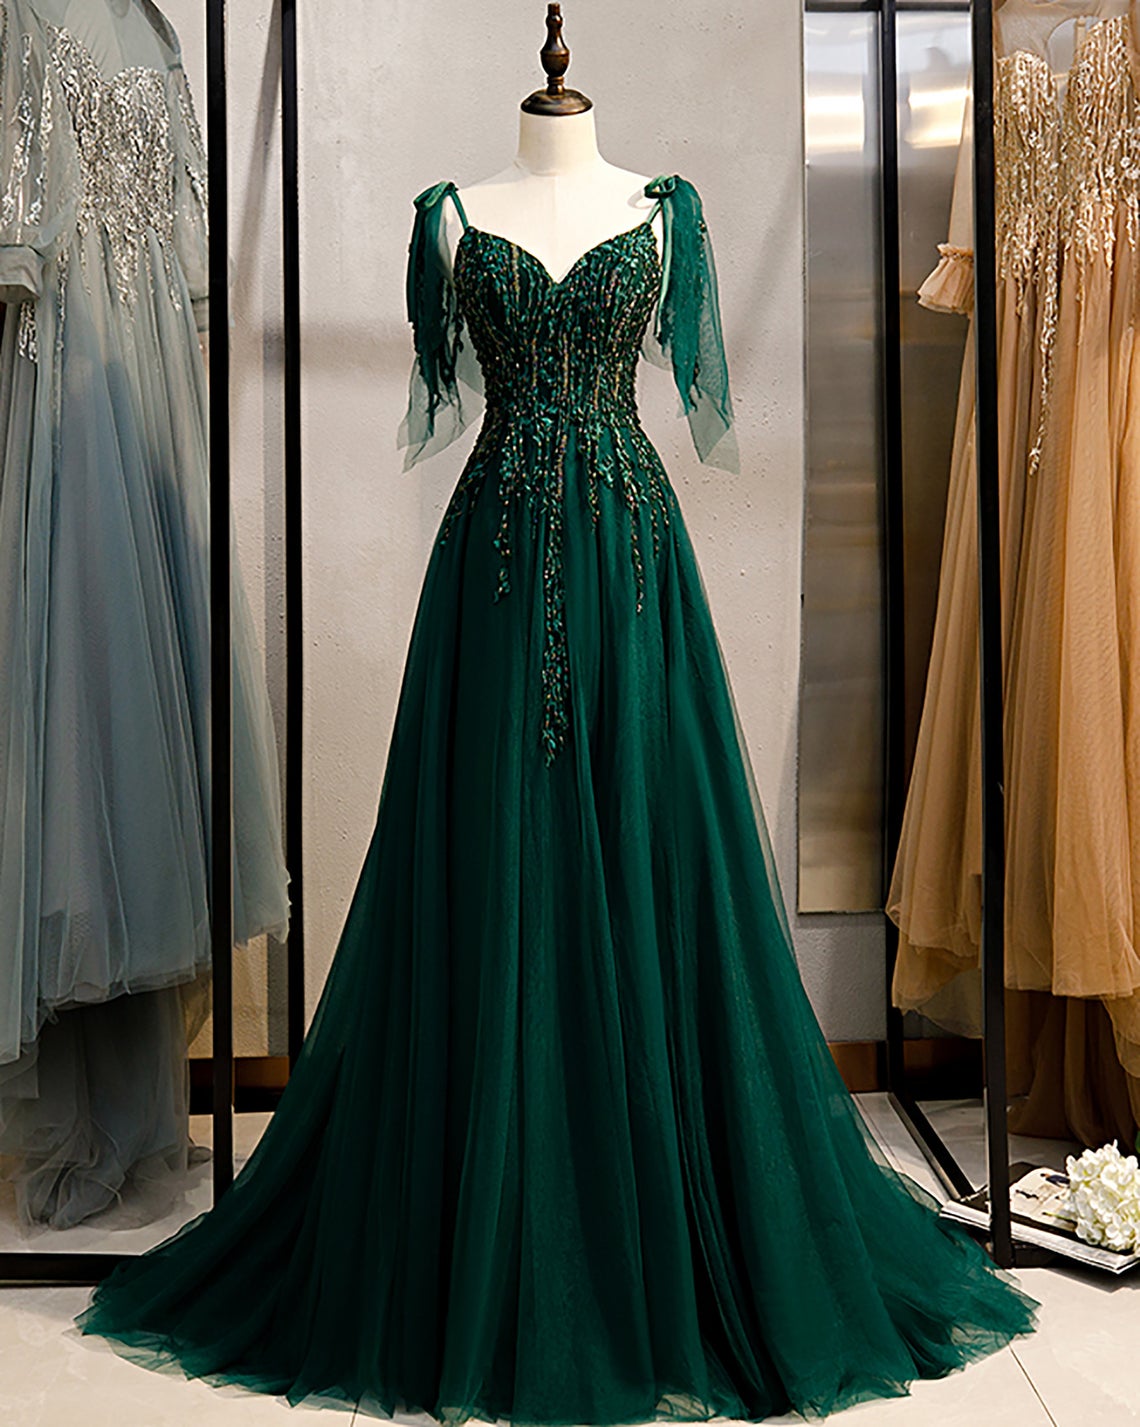 P3697 Emerald Green Spaghetti Straps Prom Dress Shinny Prom Dress Ball Gown A-line Wedding Dress Fairy Prom Gown Banquet Dress Formal Party